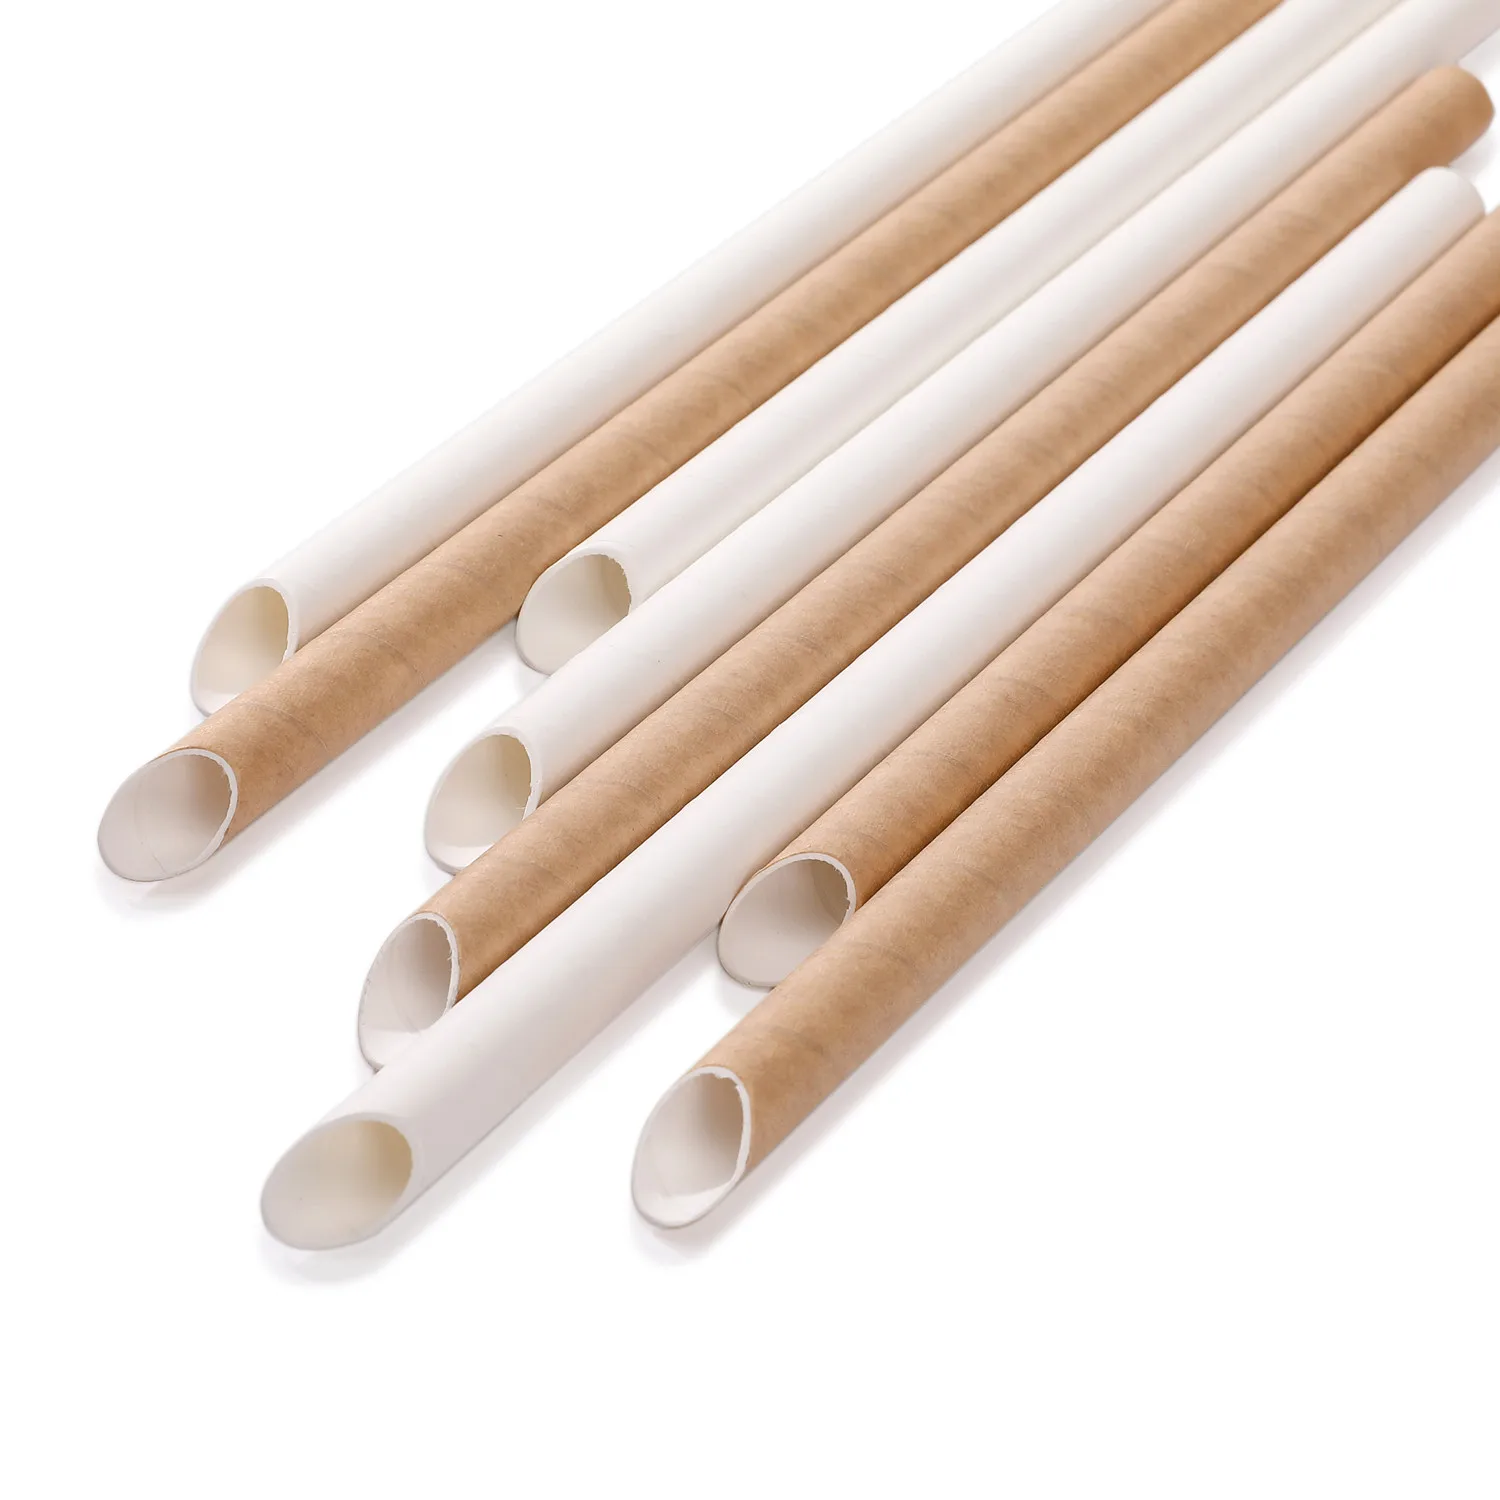 

Disposable paper straw tip Individually packaged beverage Boba pearl milk tea straw Bubble Tea Paper Straws